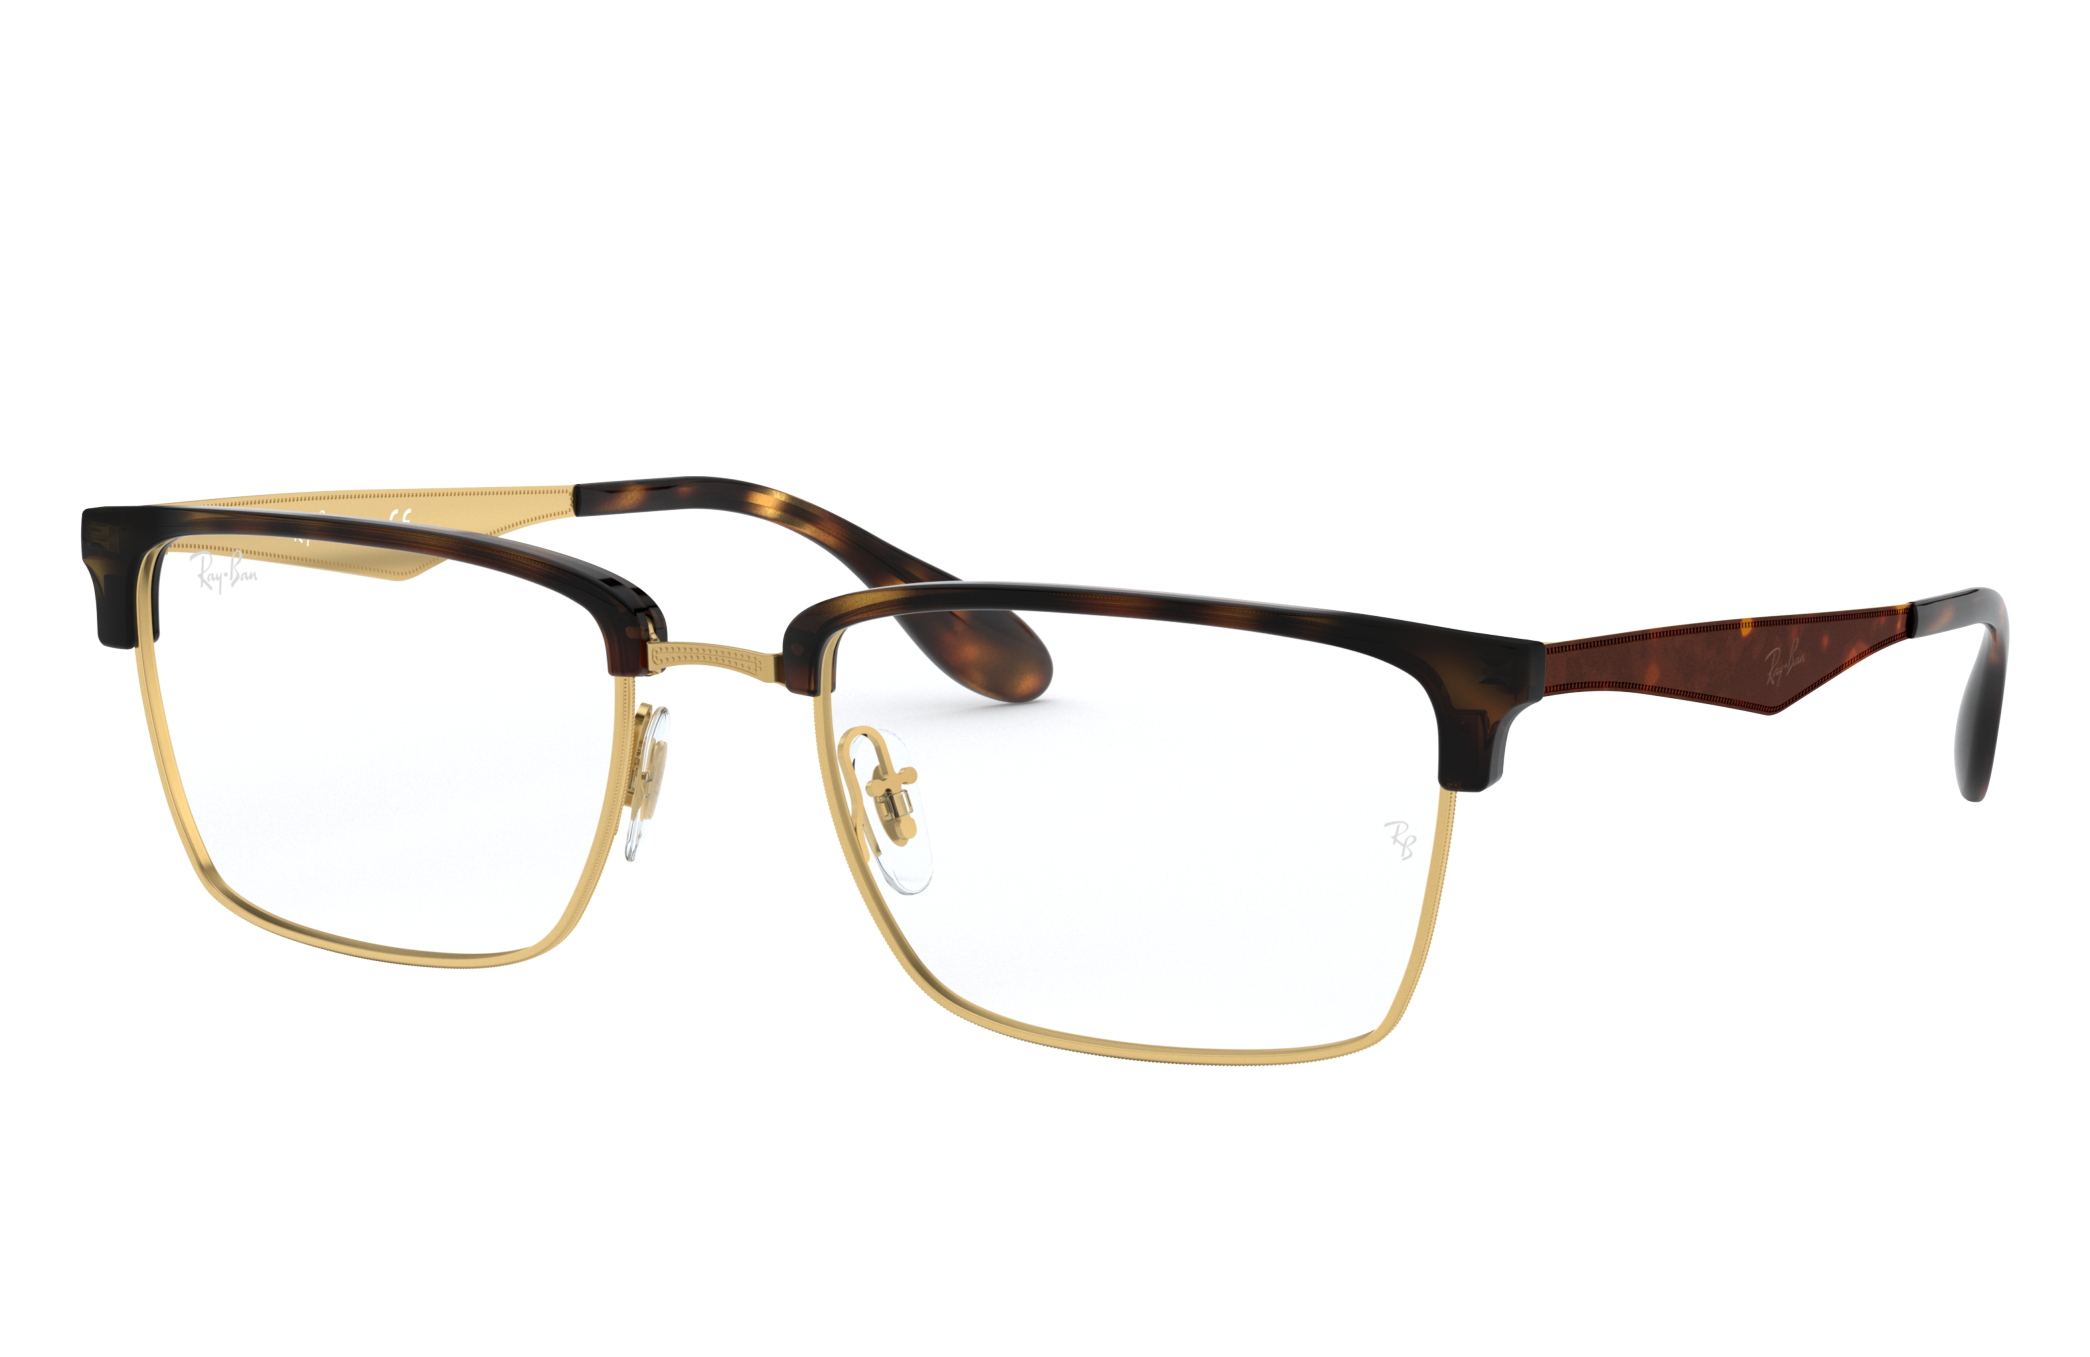 Rb6397 Eyeglasses with Gold Frame - RB6397 | Ray-Ban®